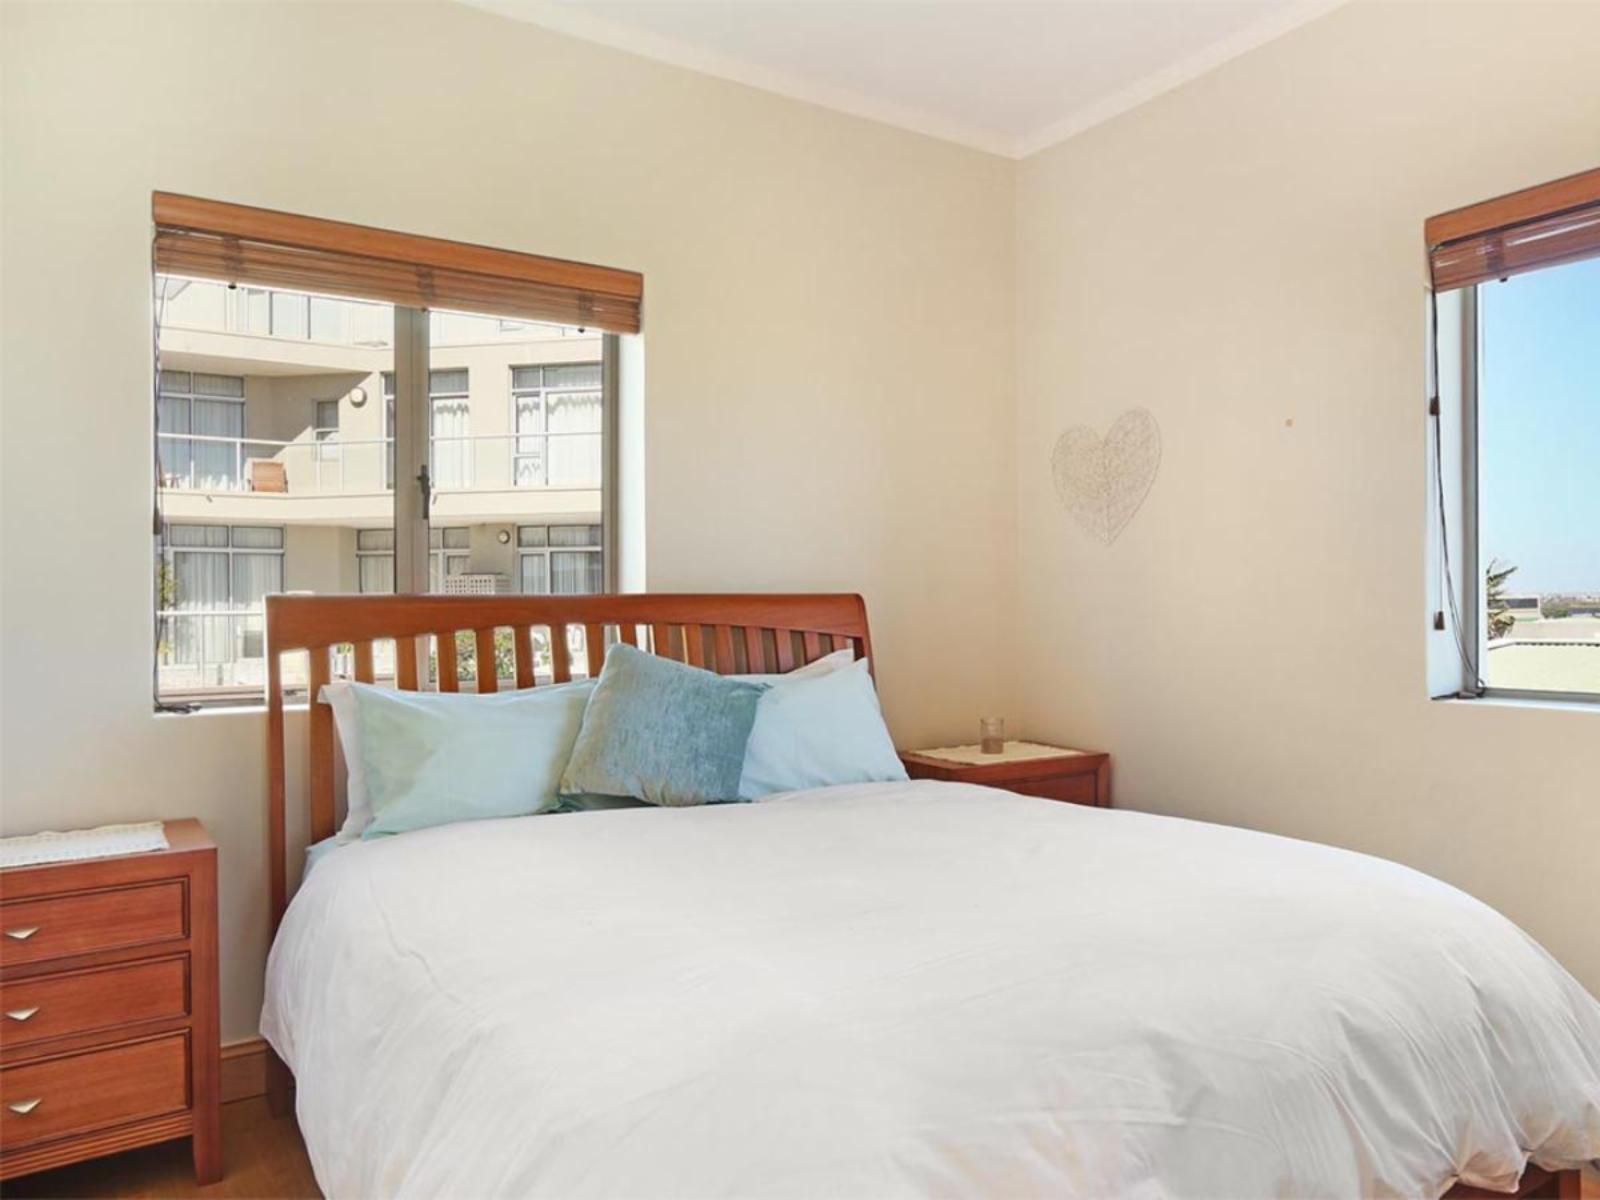 Dolphin Beach E5 By Hostagents Blouberg Cape Town Western Cape South Africa Bedroom